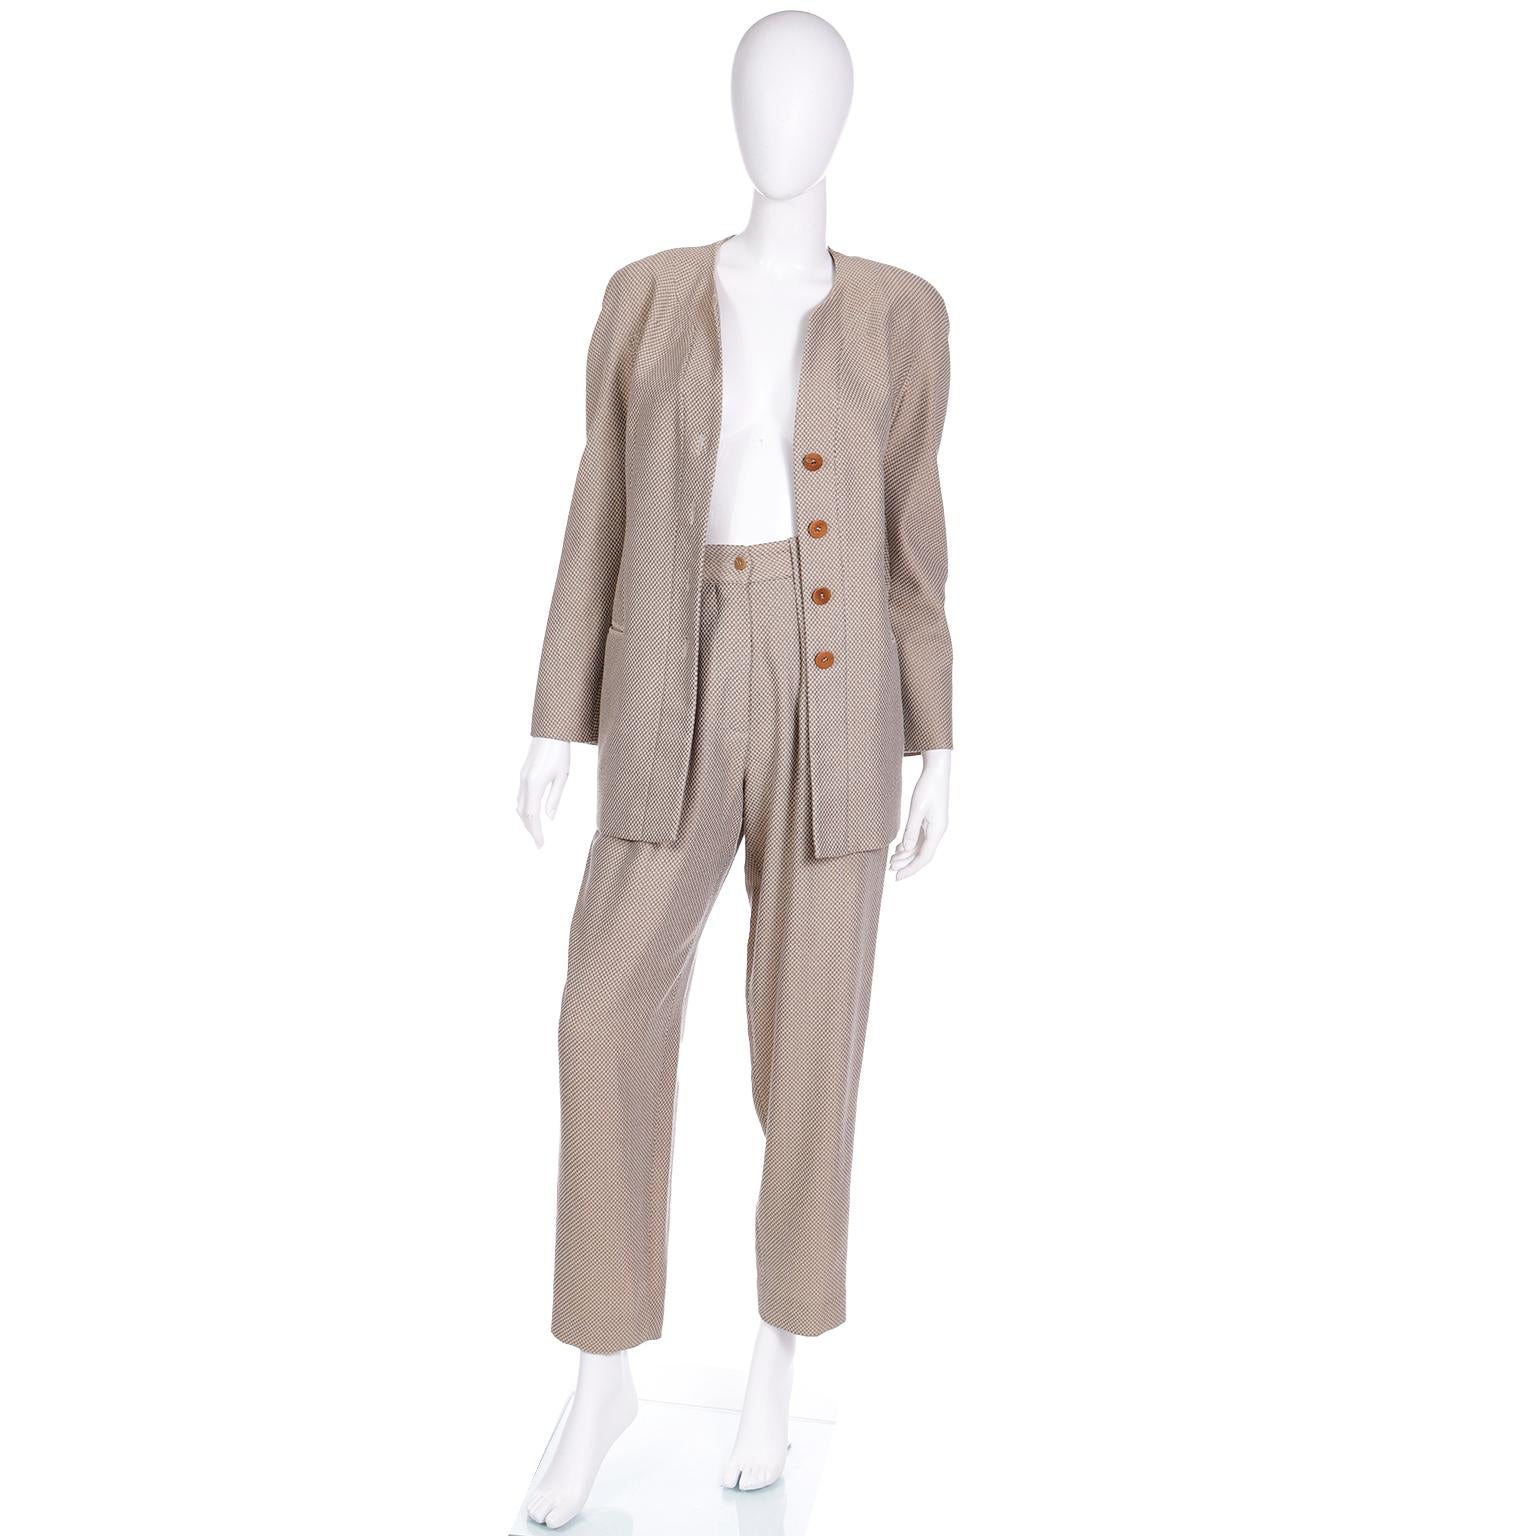 Women's Giorgio Armani Tan Check Wool Vintage 2pc Jacket and Trousers Suit